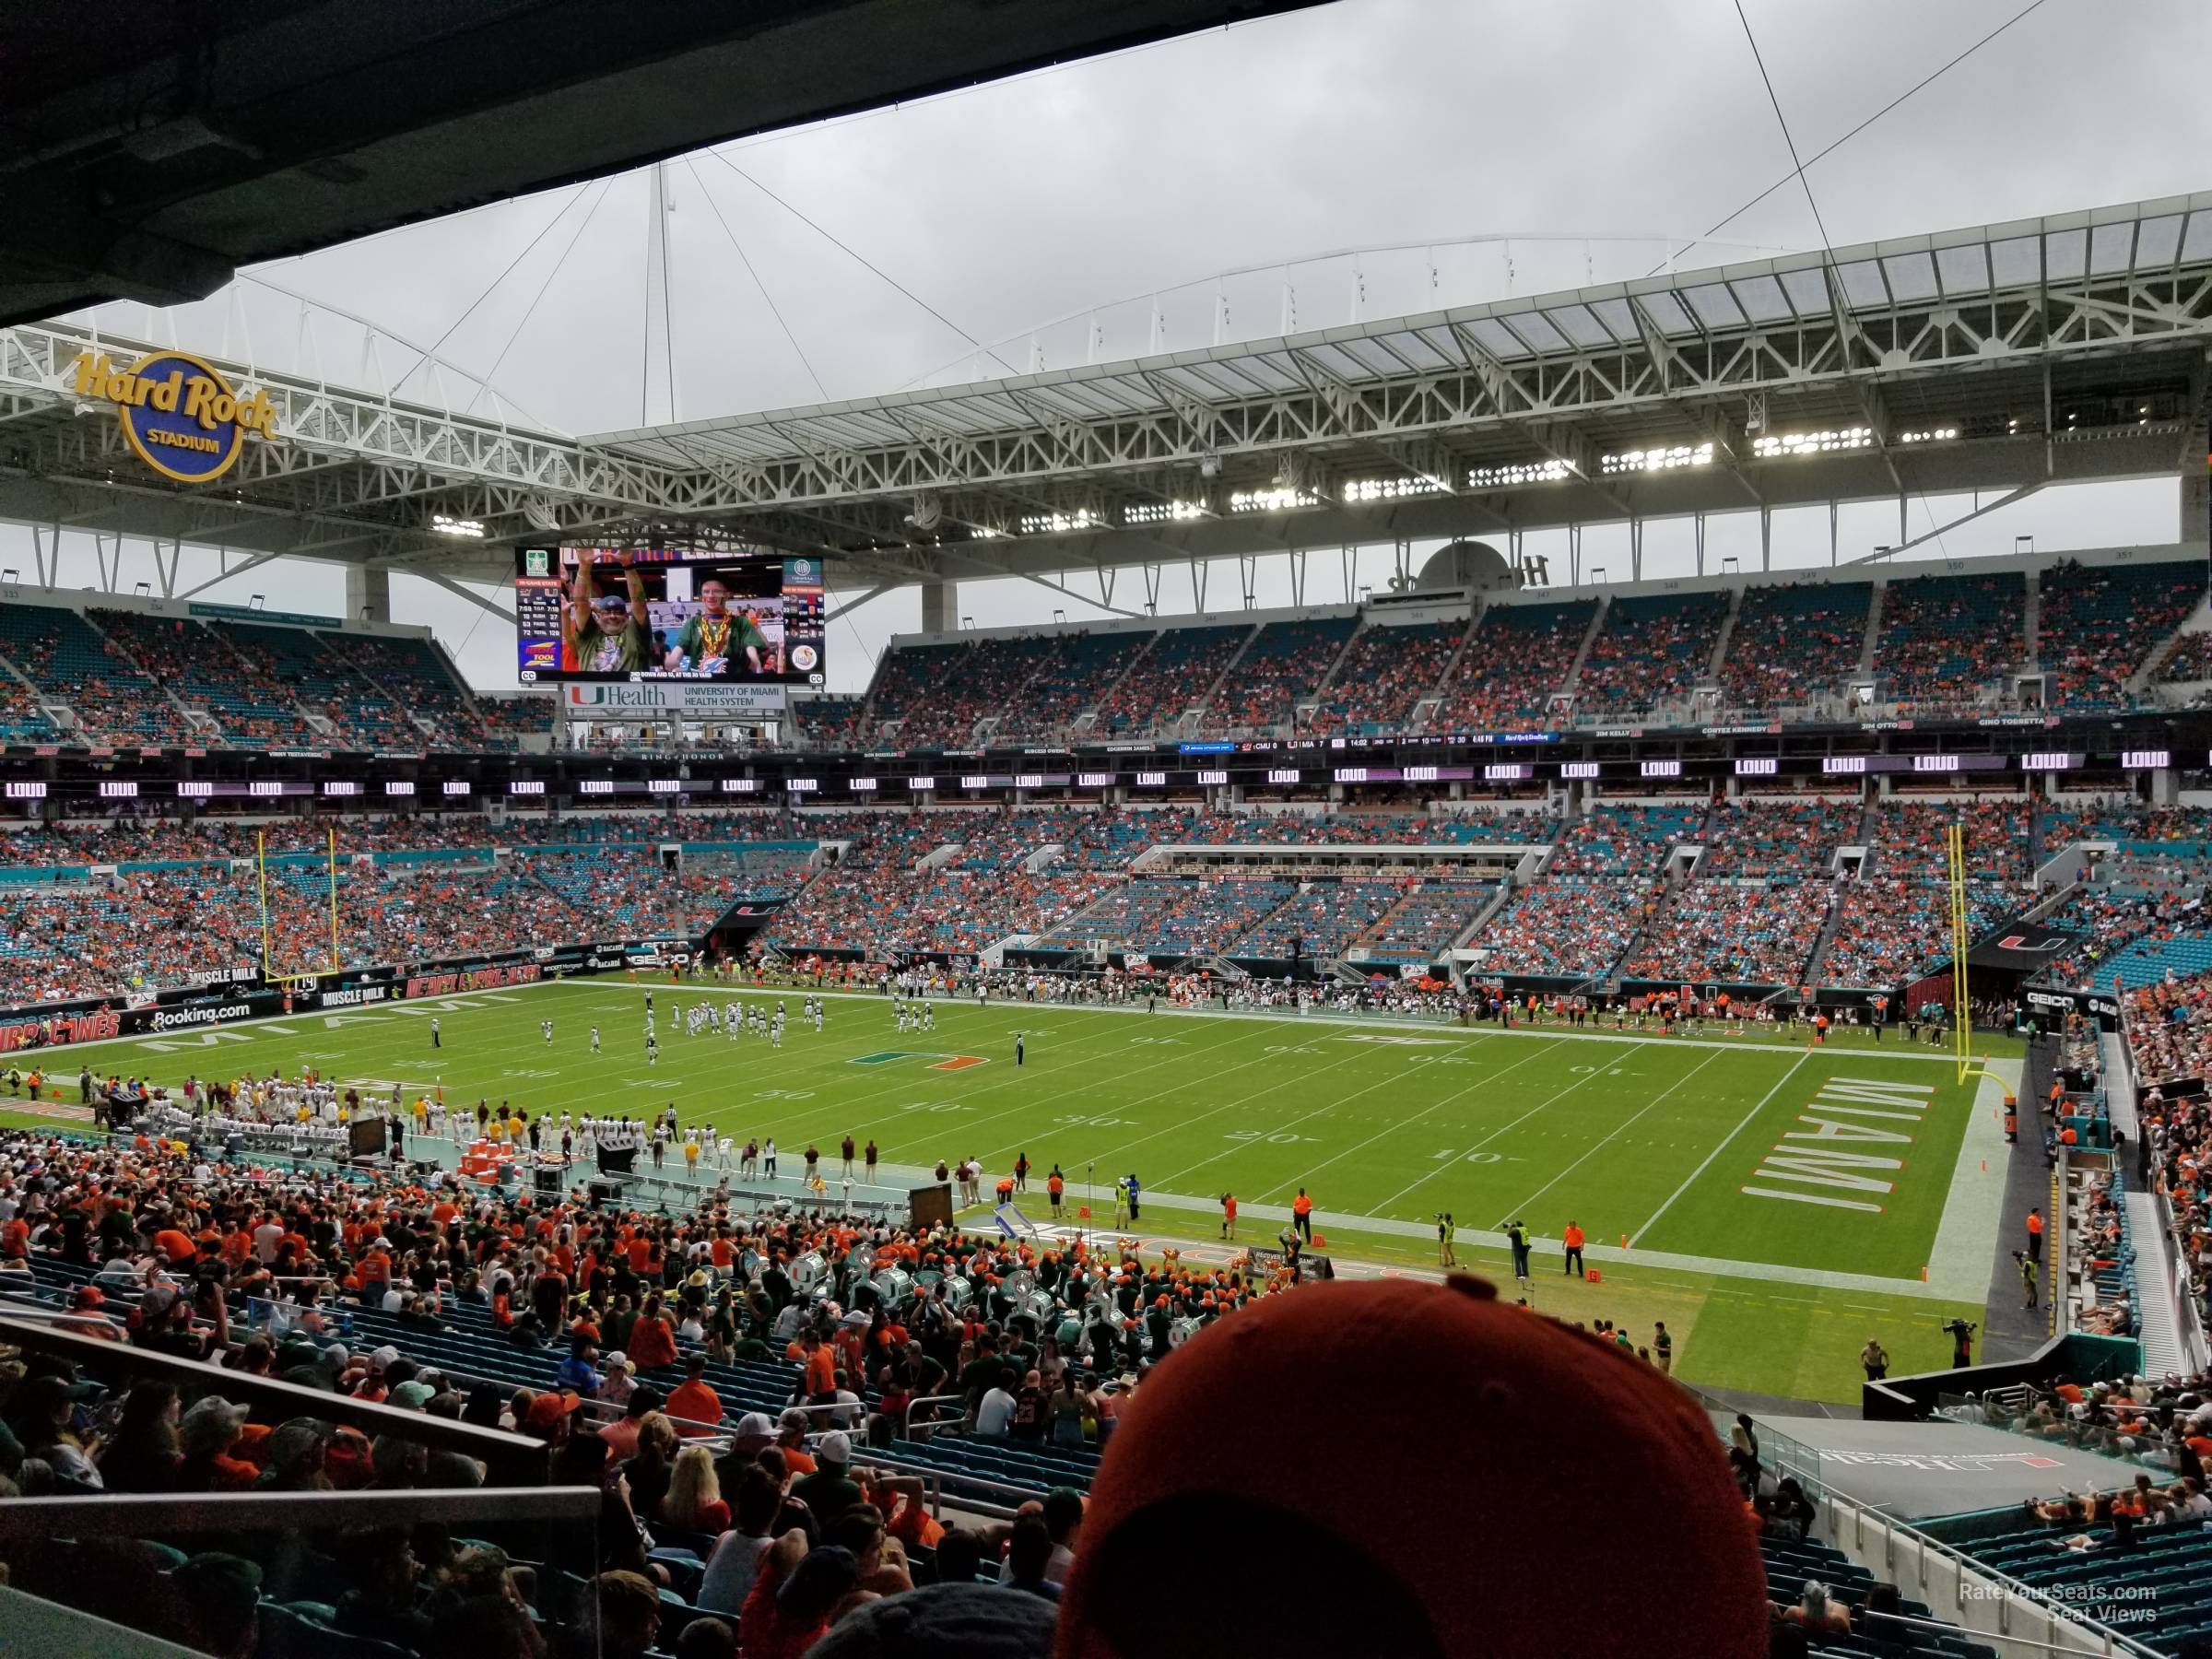 section 213, row 10 seat view  for football - hard rock stadium